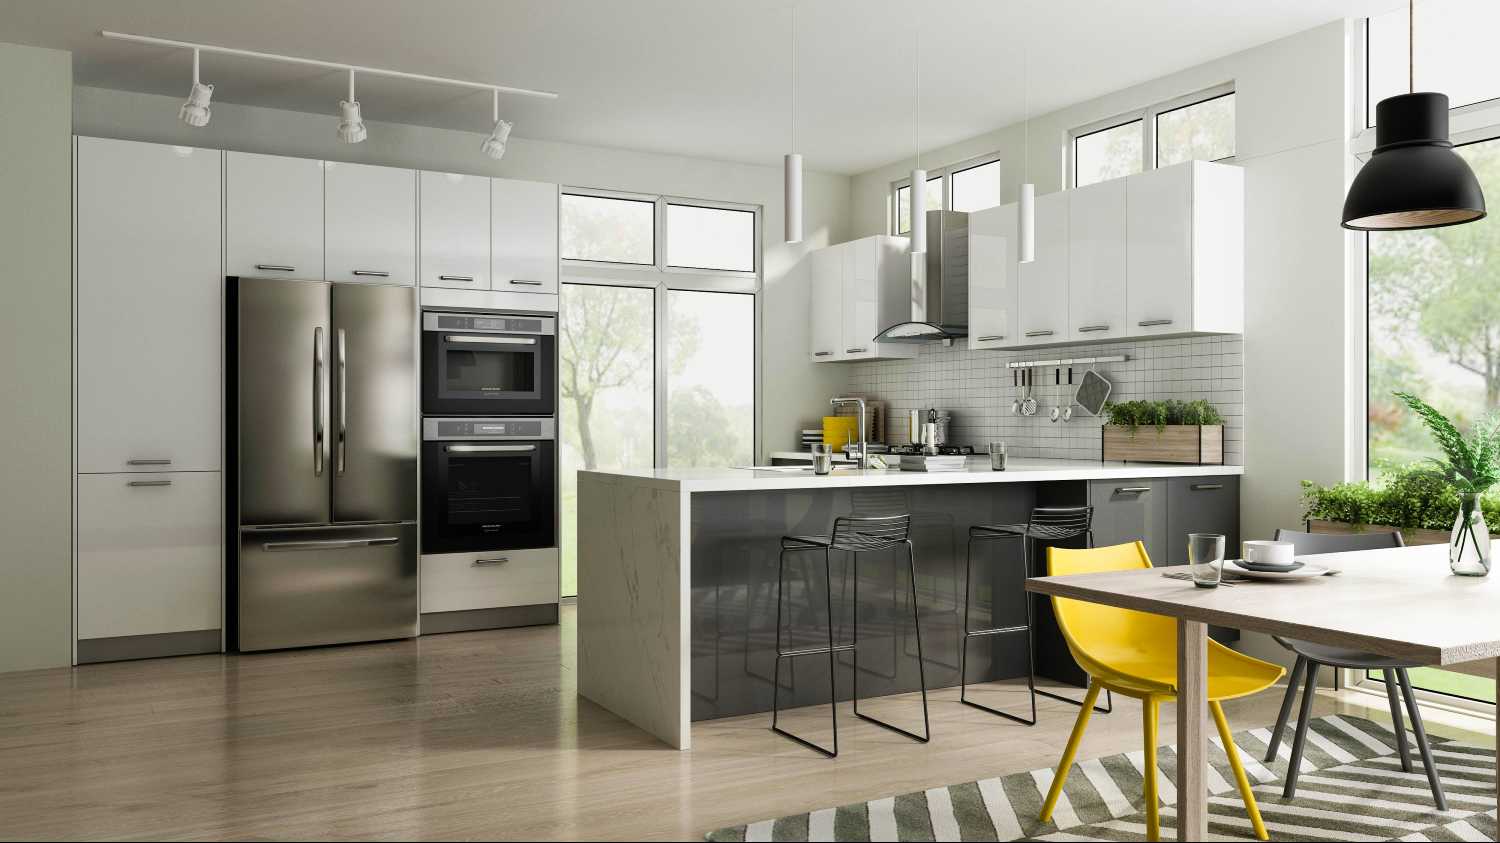 Modern Staged Kitchen with Sleek european style cabinets in white and grey